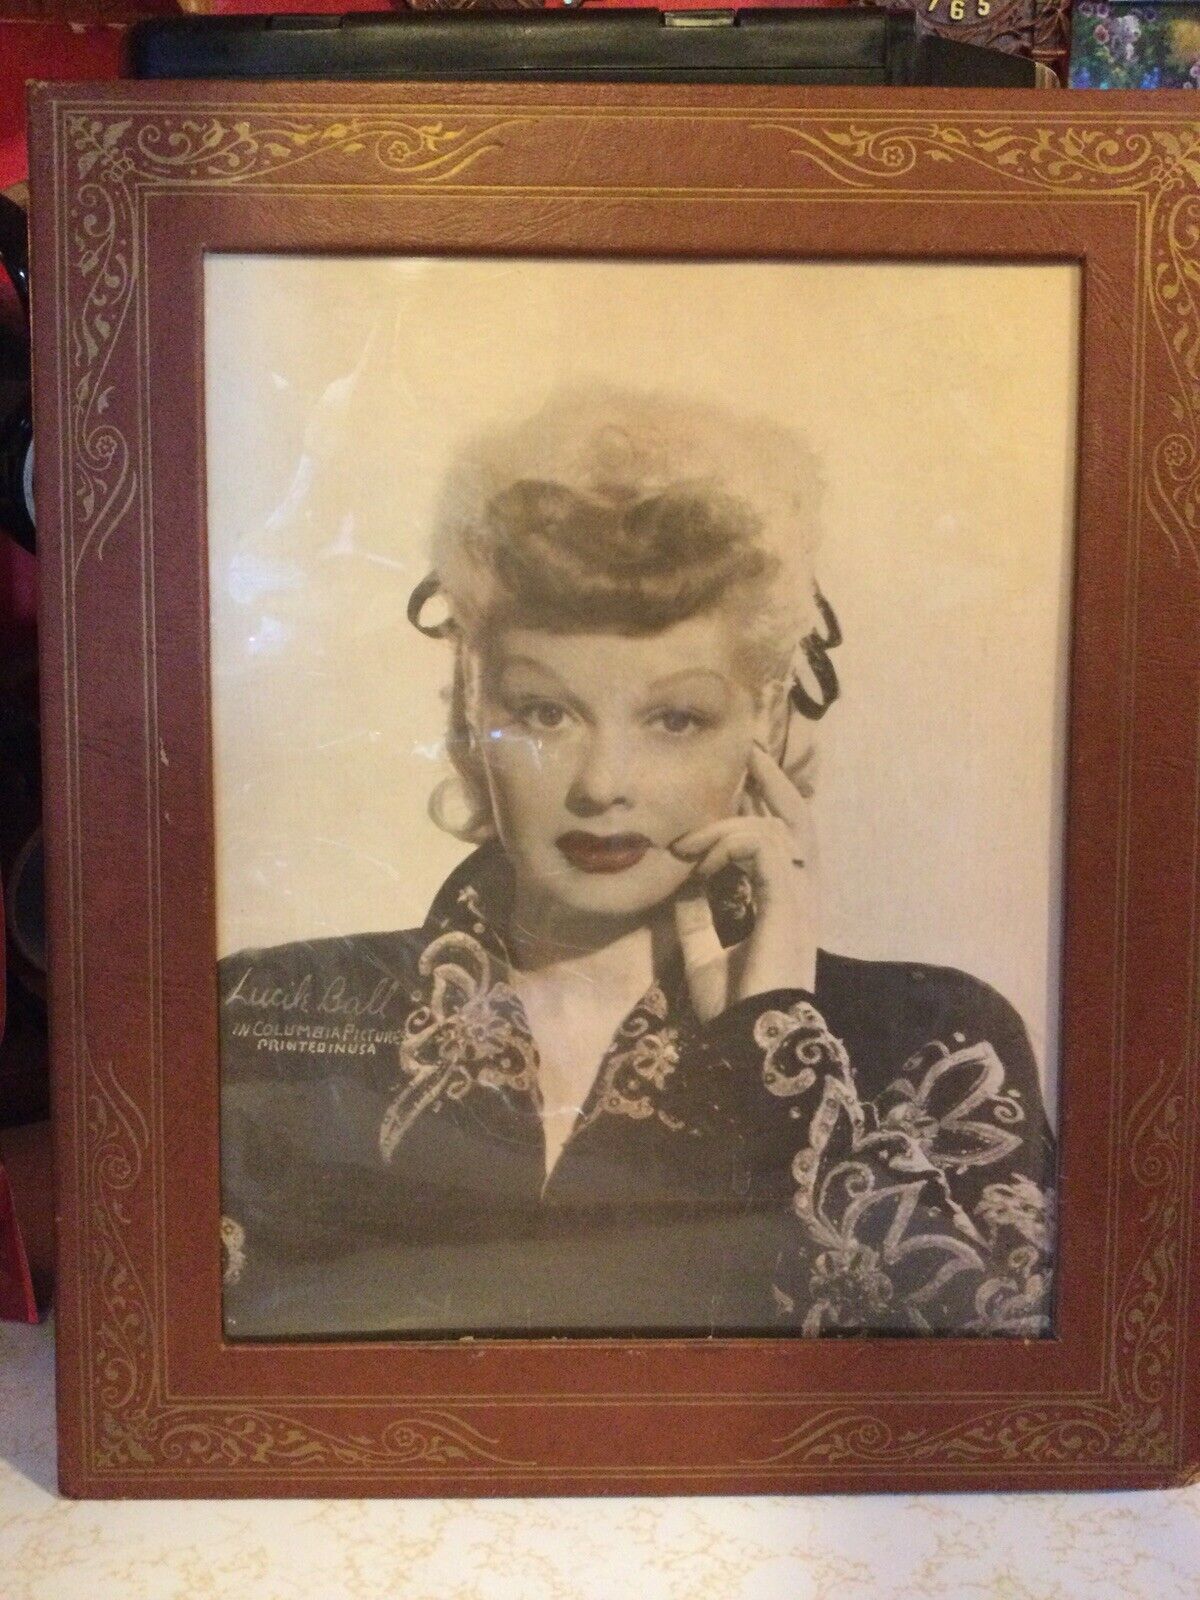 Promotional Photo of Lucille Ball in Cool Vintage Frame - Columbia Pictures